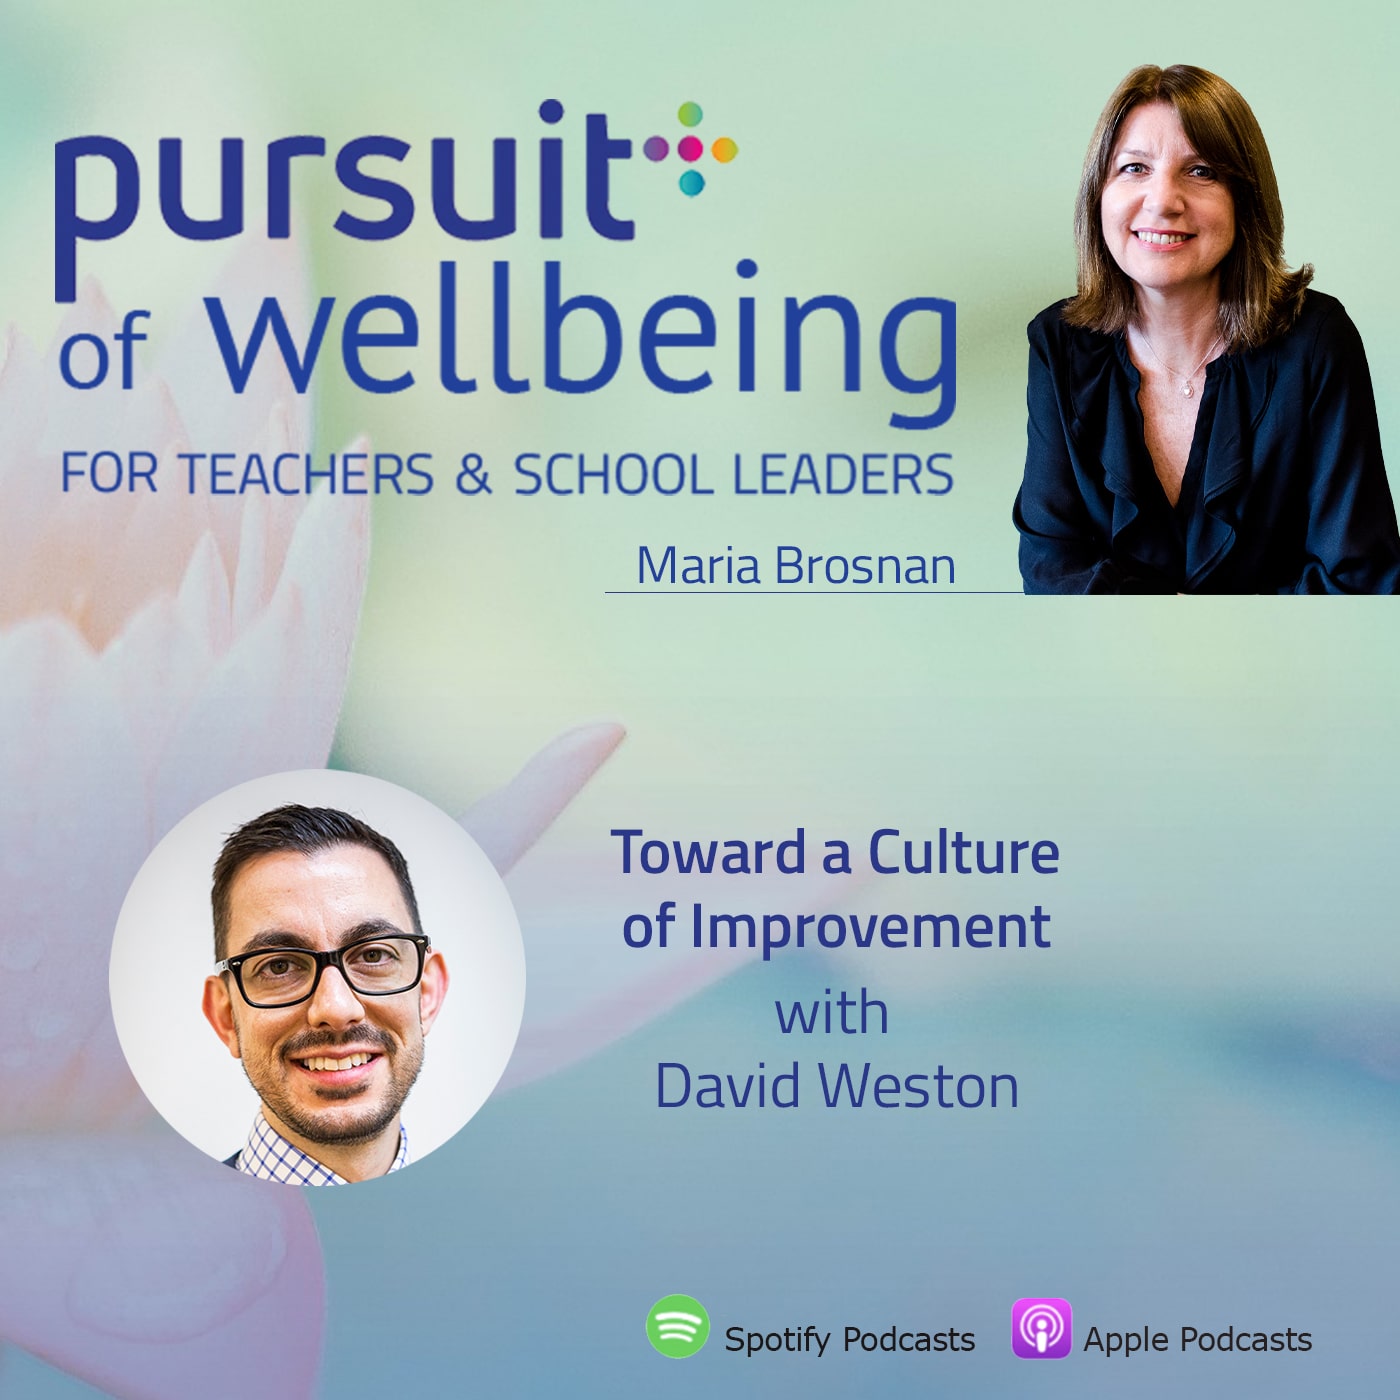 Towards a Culture of Improvement with David Weston